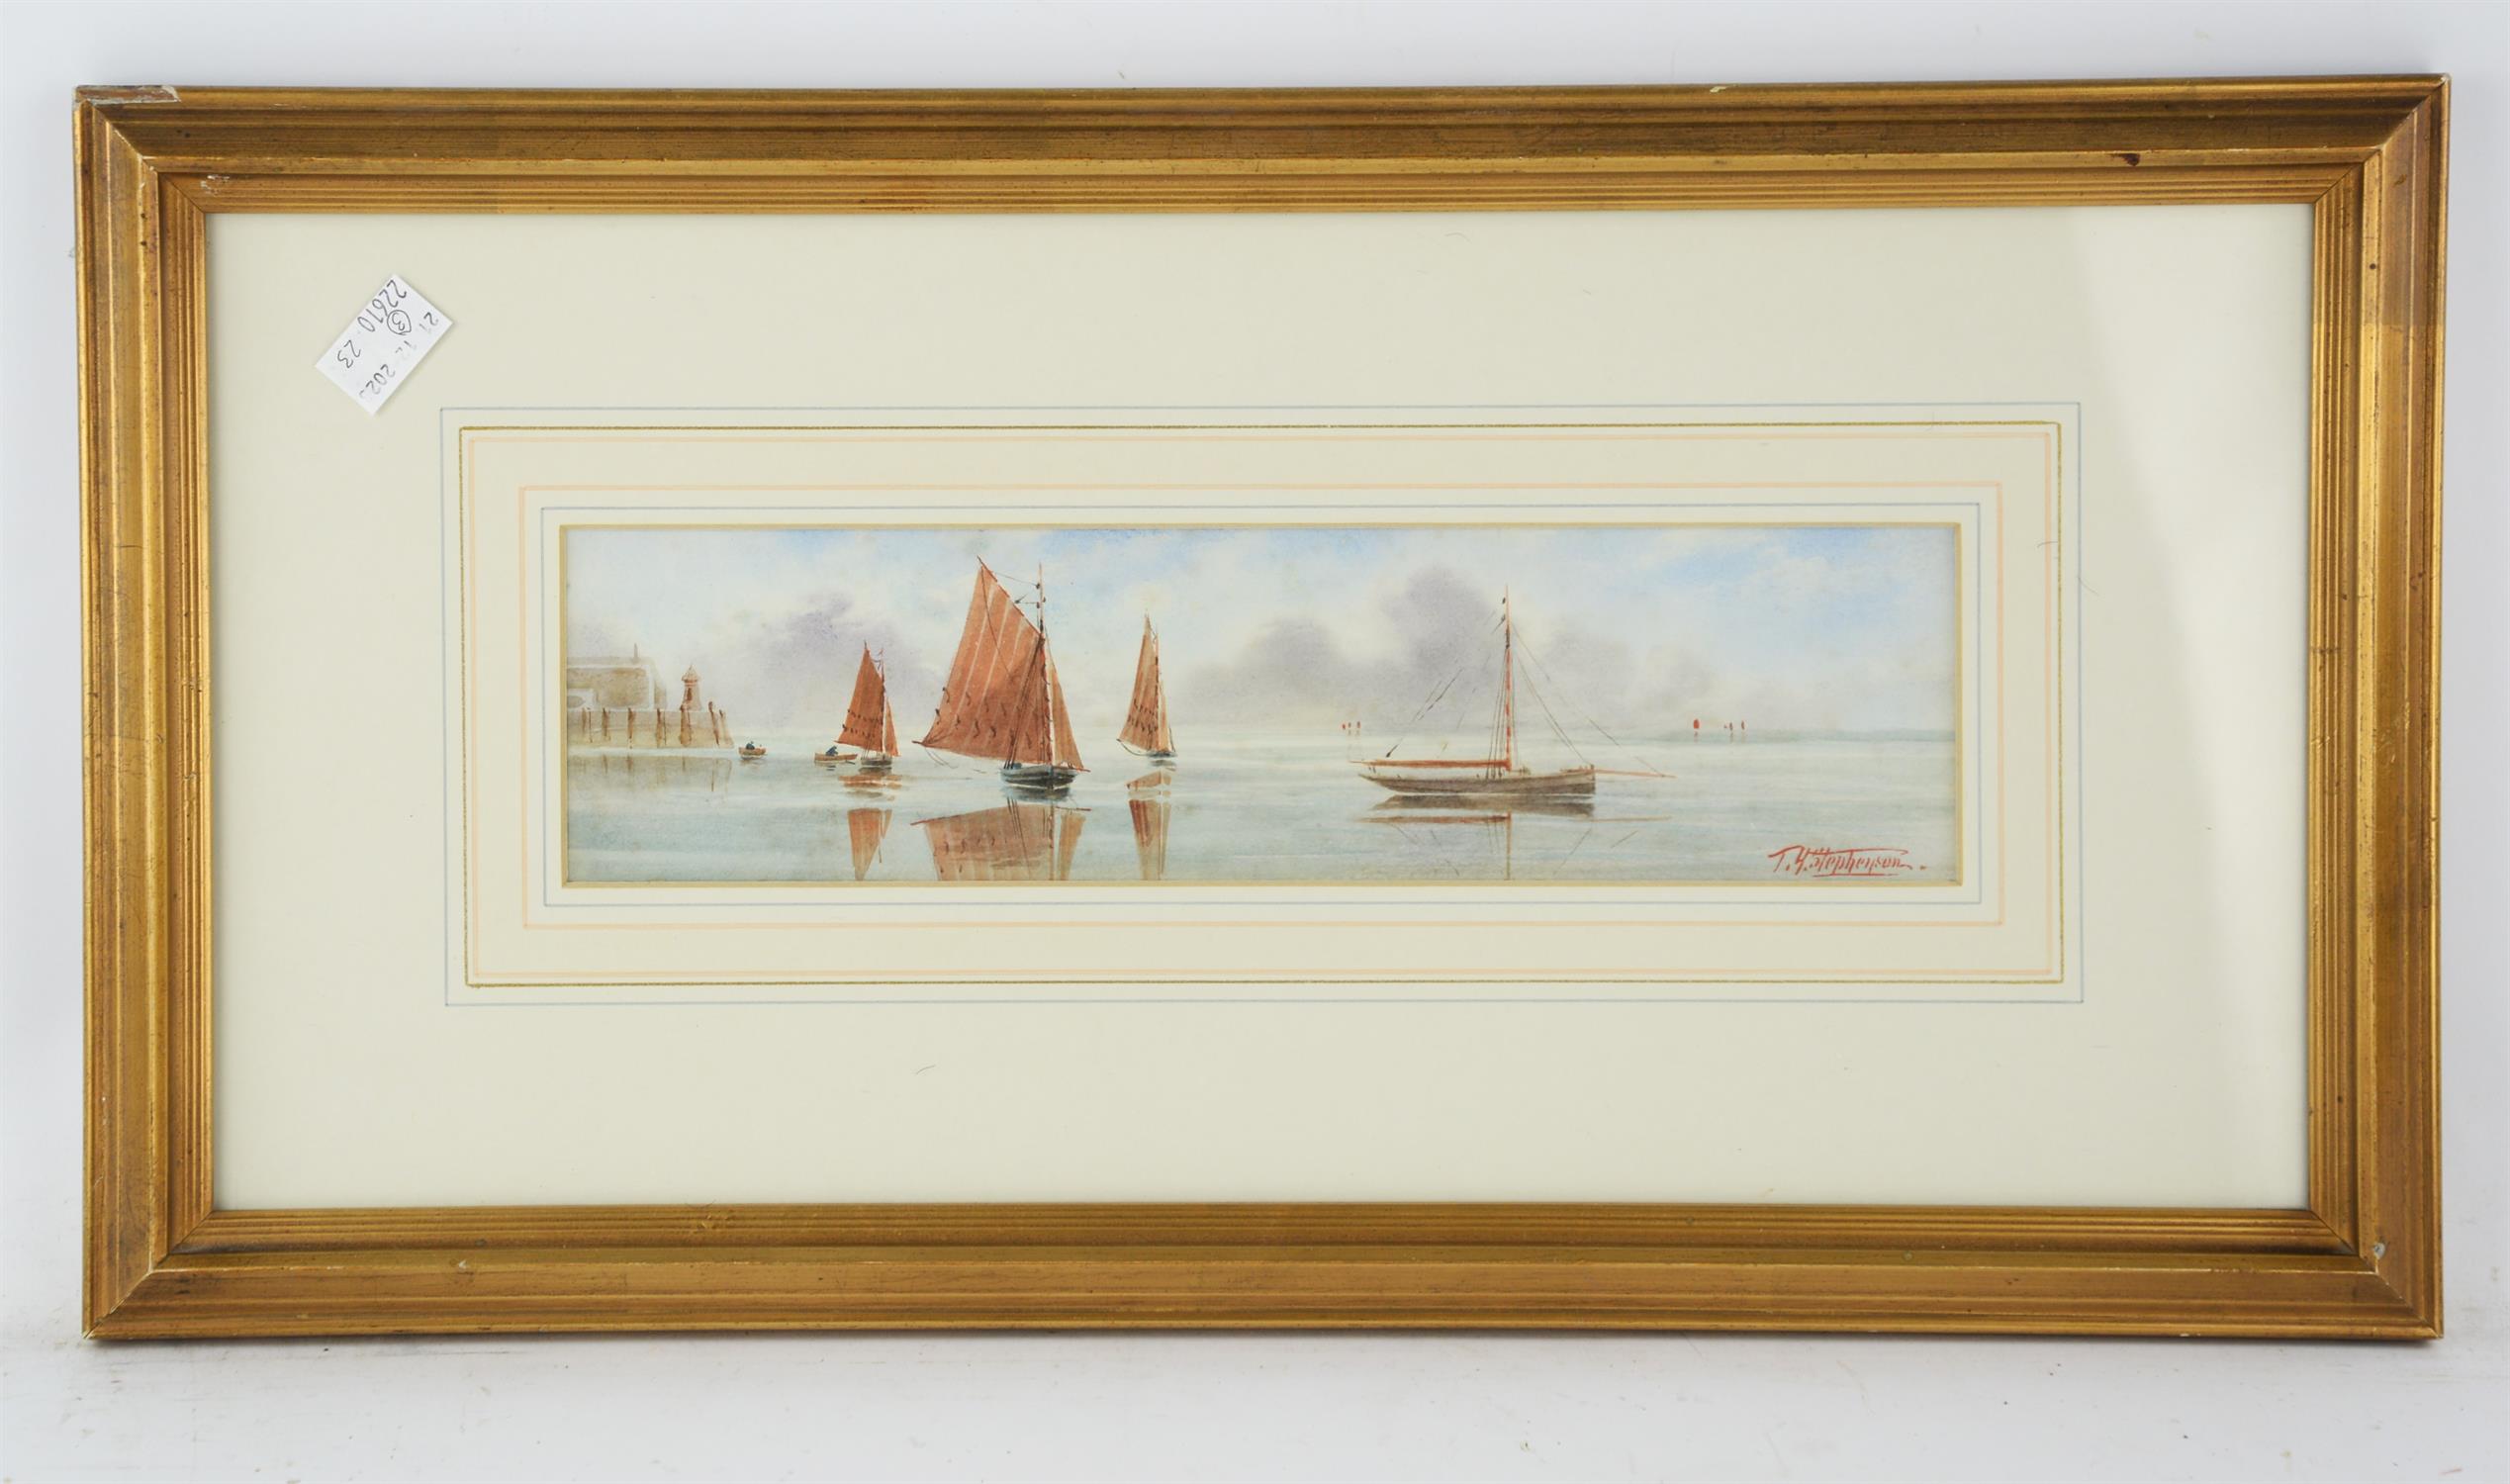 T. H. Stephenson (early 20th century), Coastal scenes, a group of three watercolours, all signed,